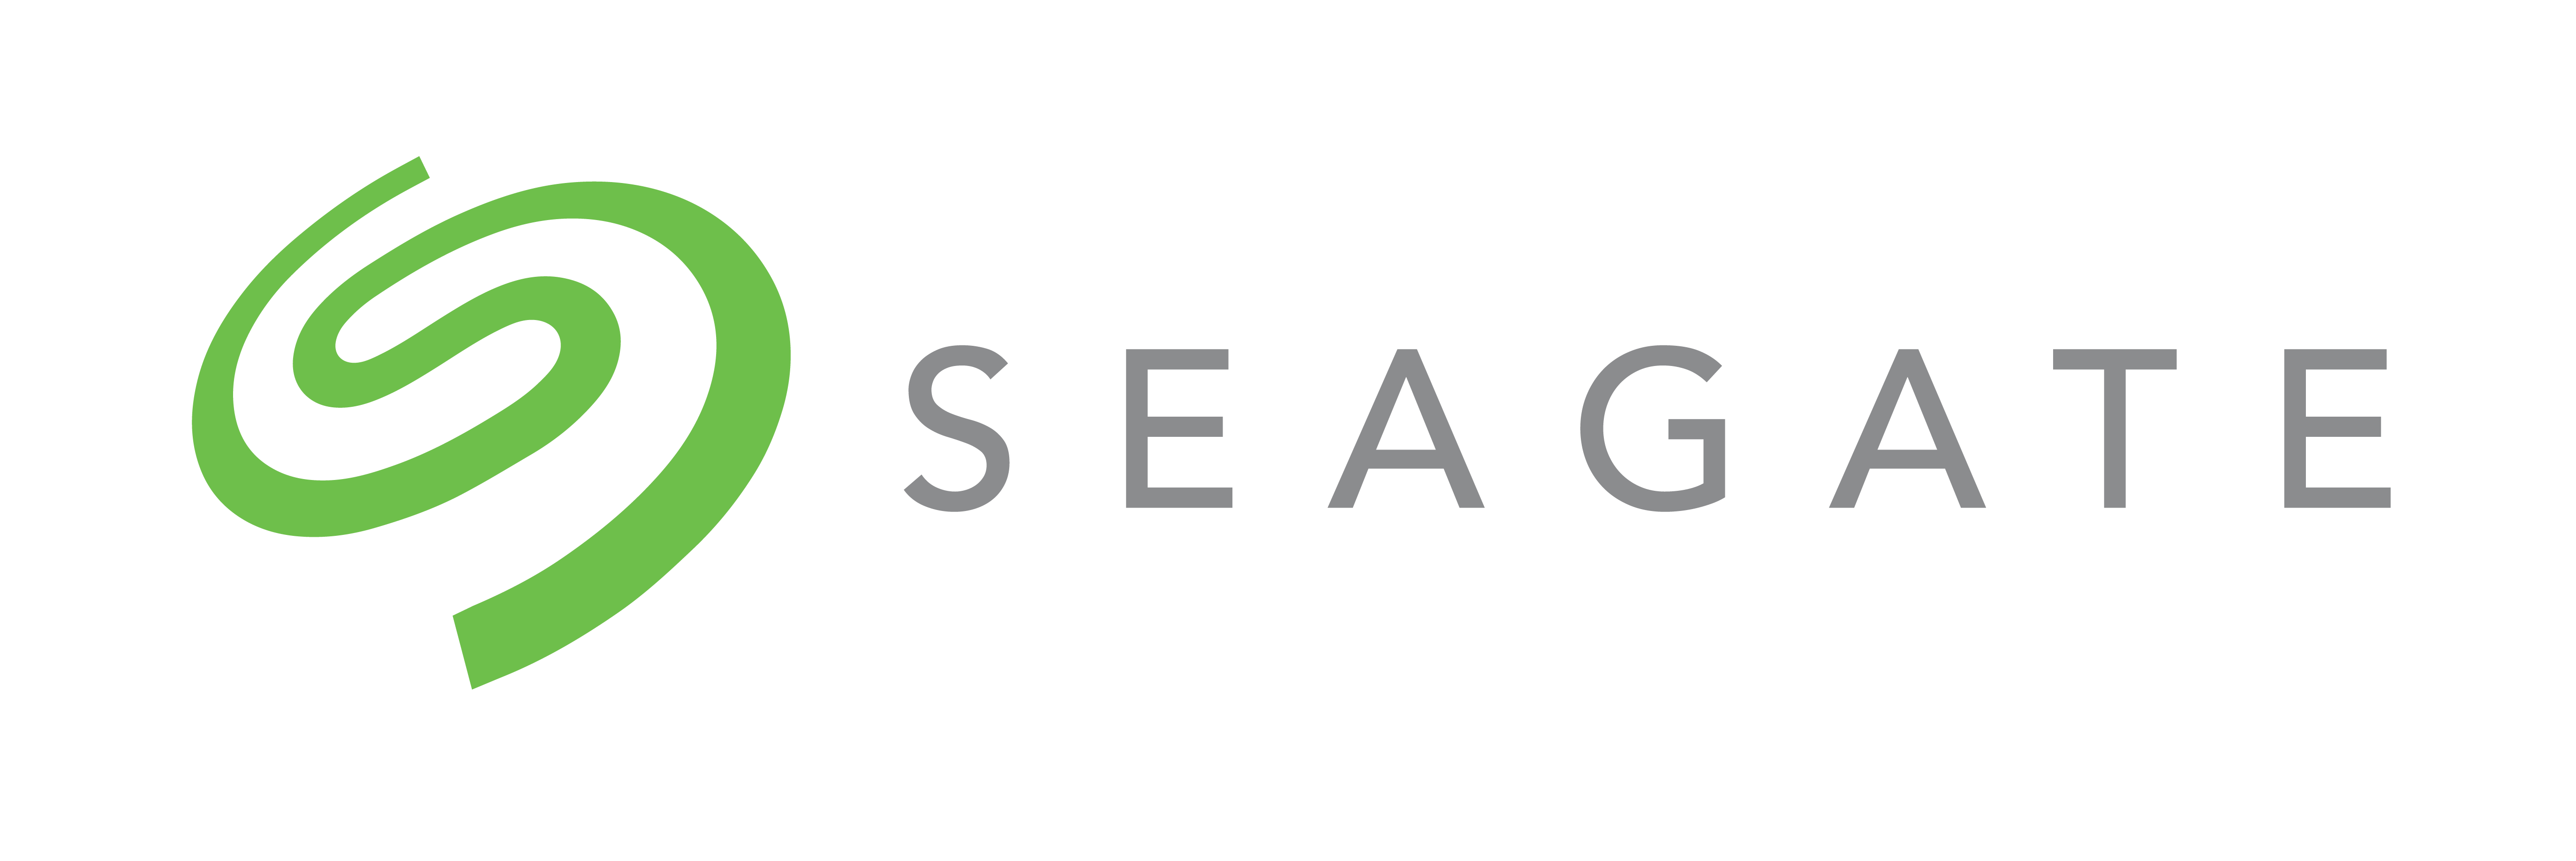 Seagate PNG - 102329